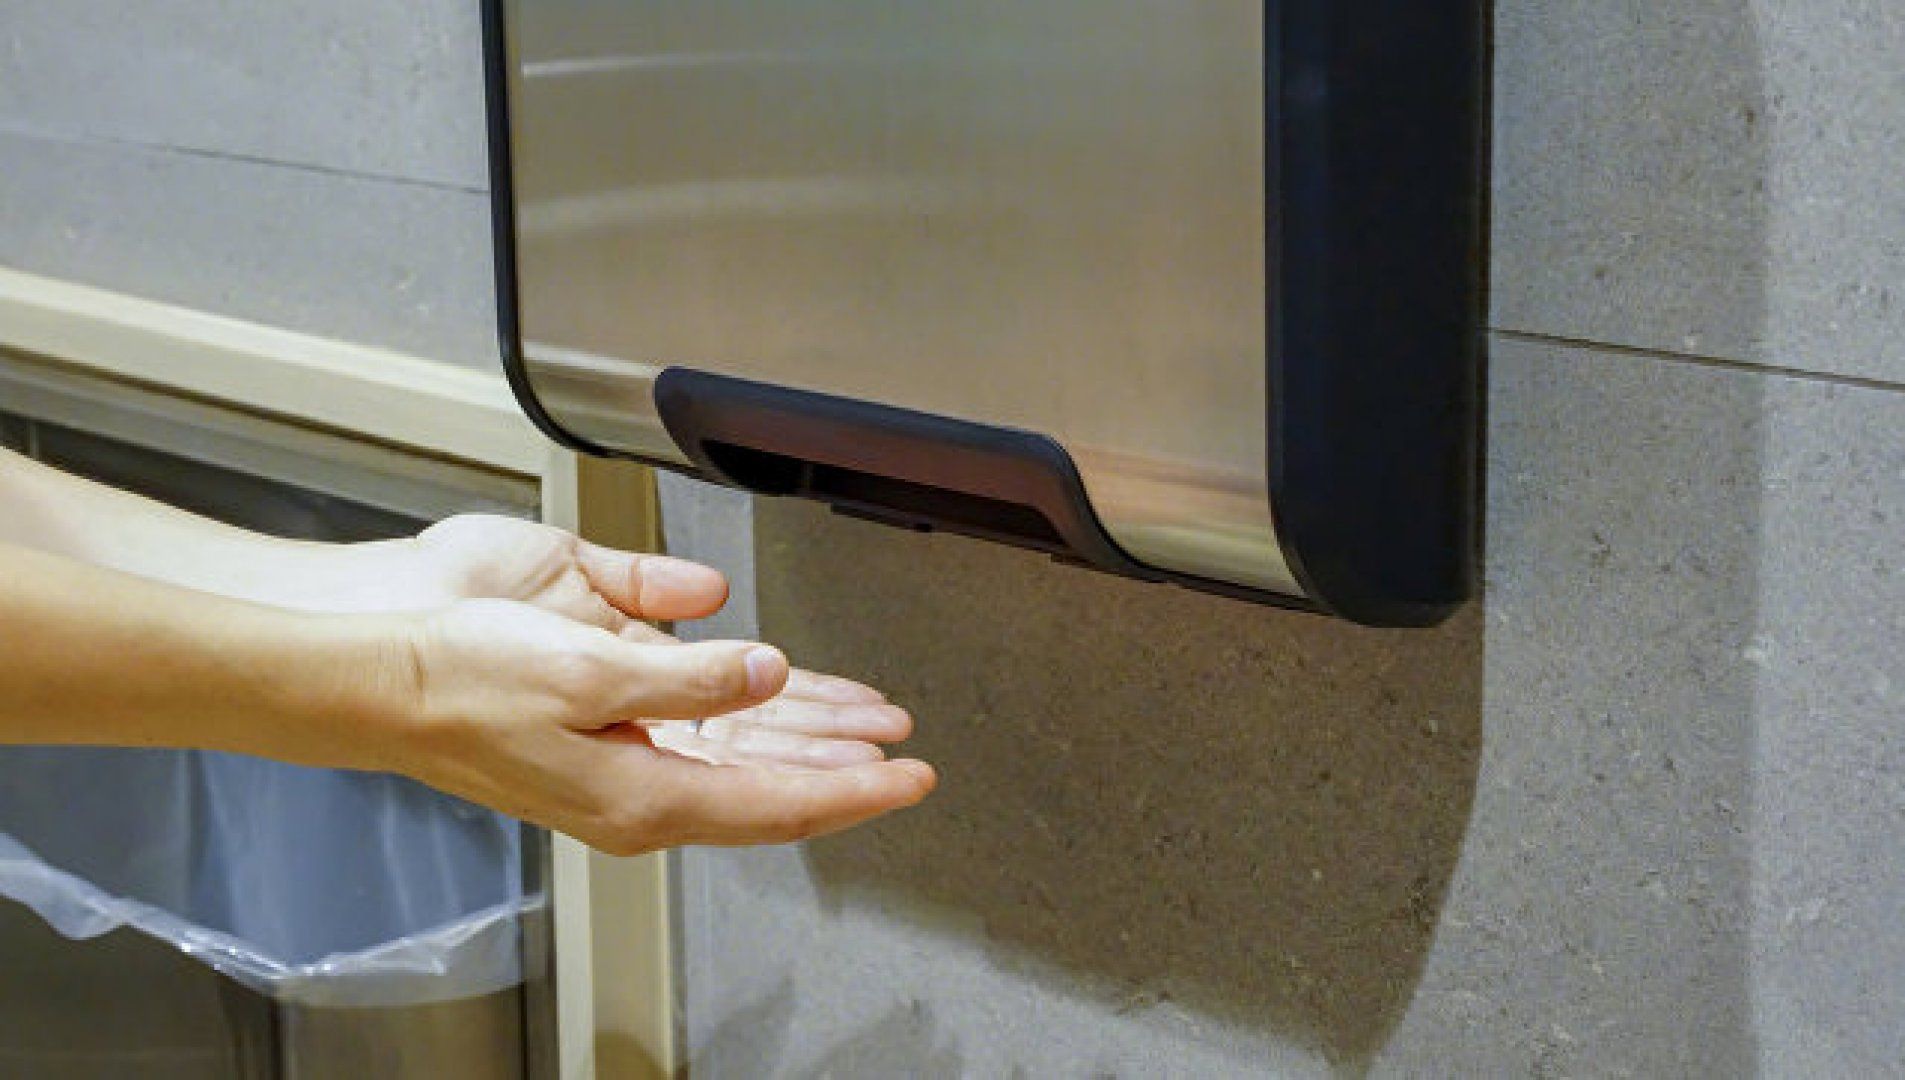 Ranking of the best hand dryers of 2020